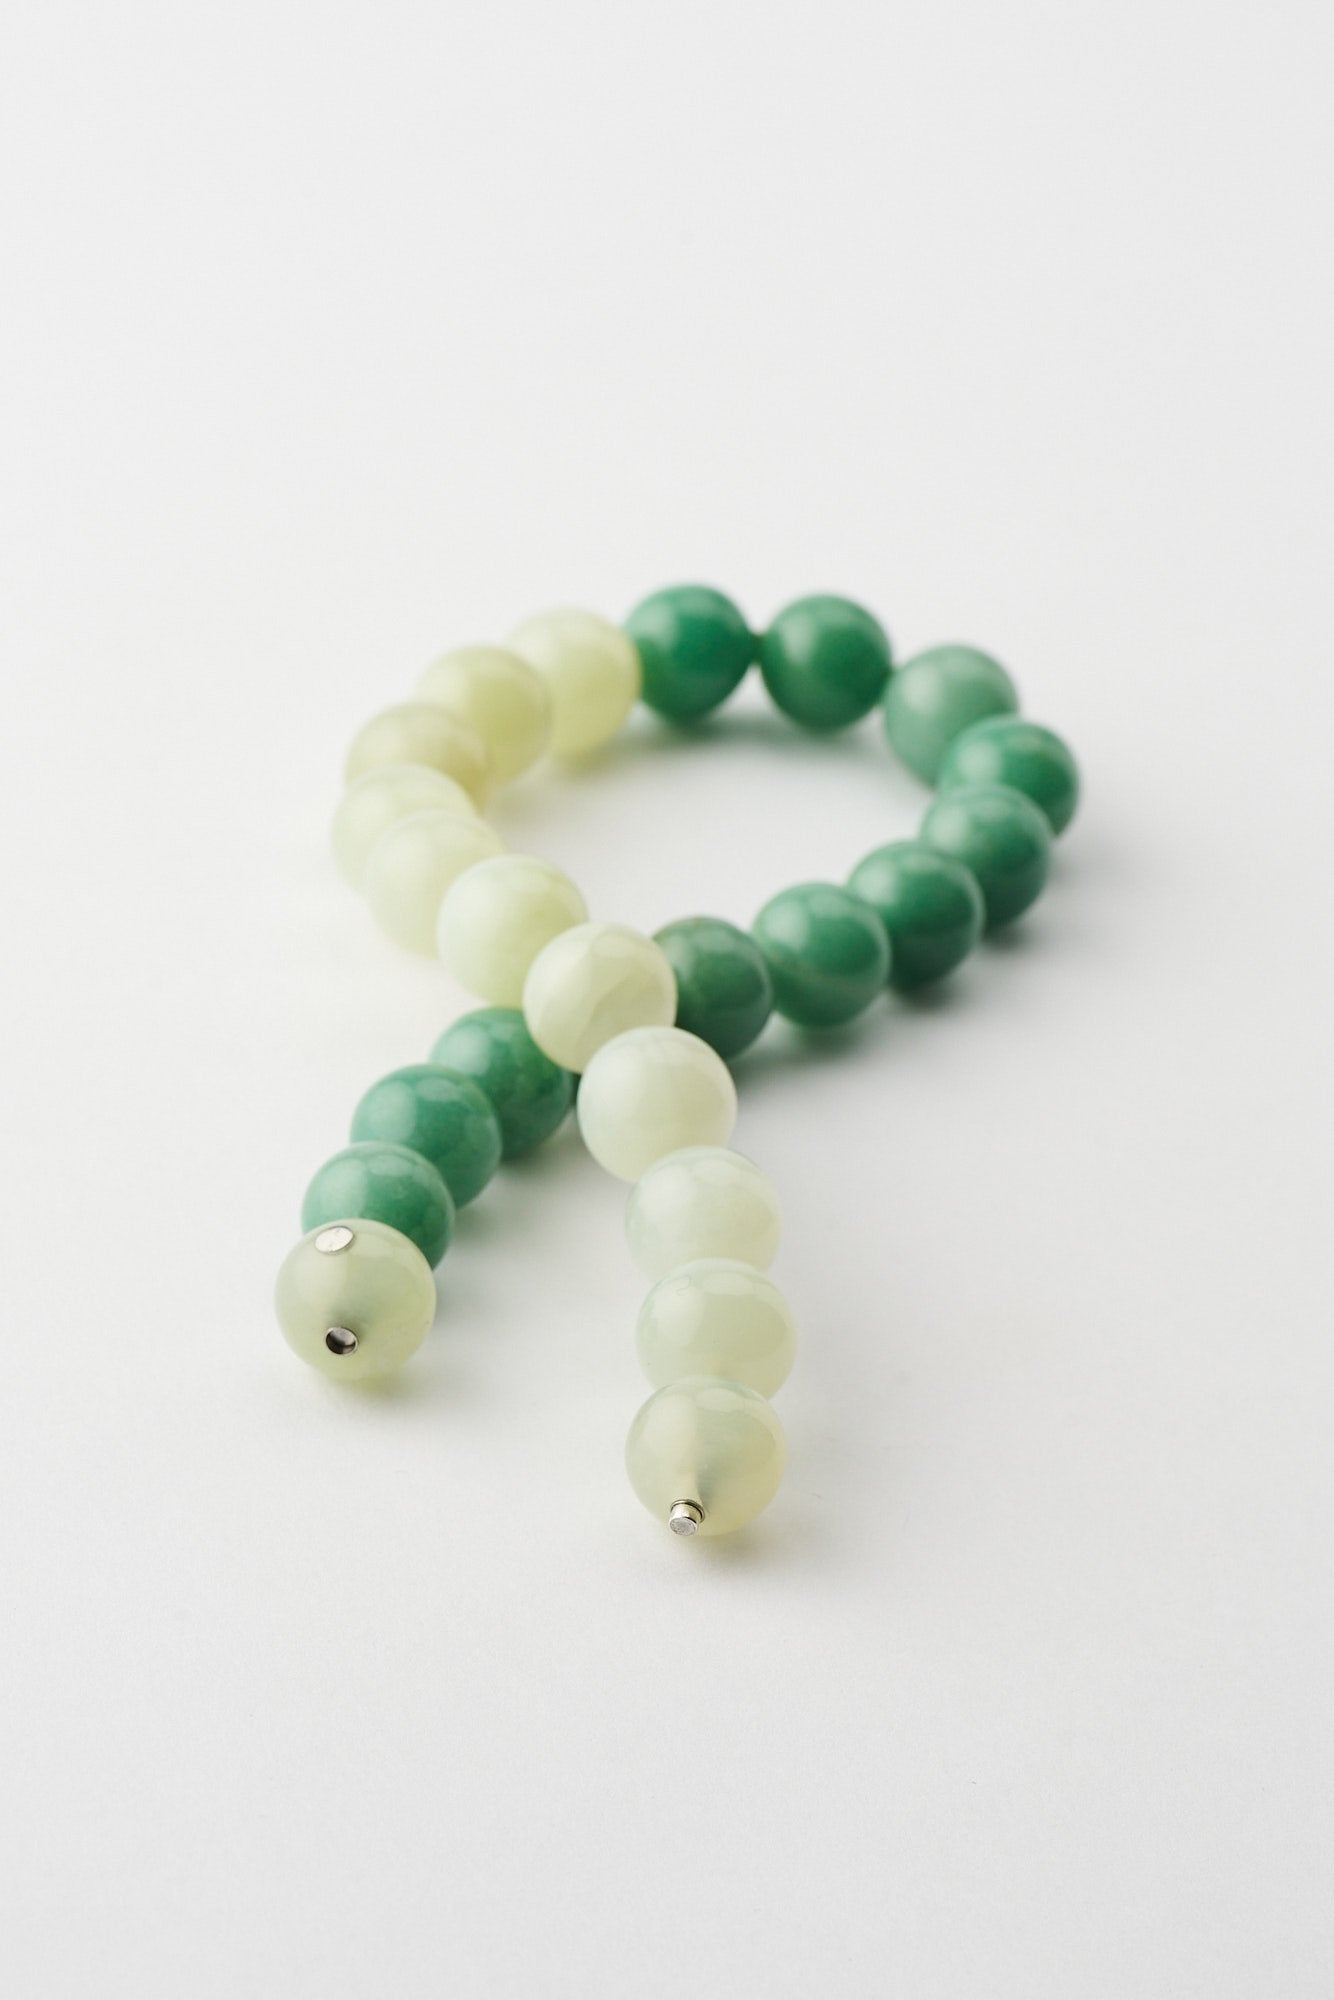 Mussels and Muscles Bicolor Jade Spheres Choker